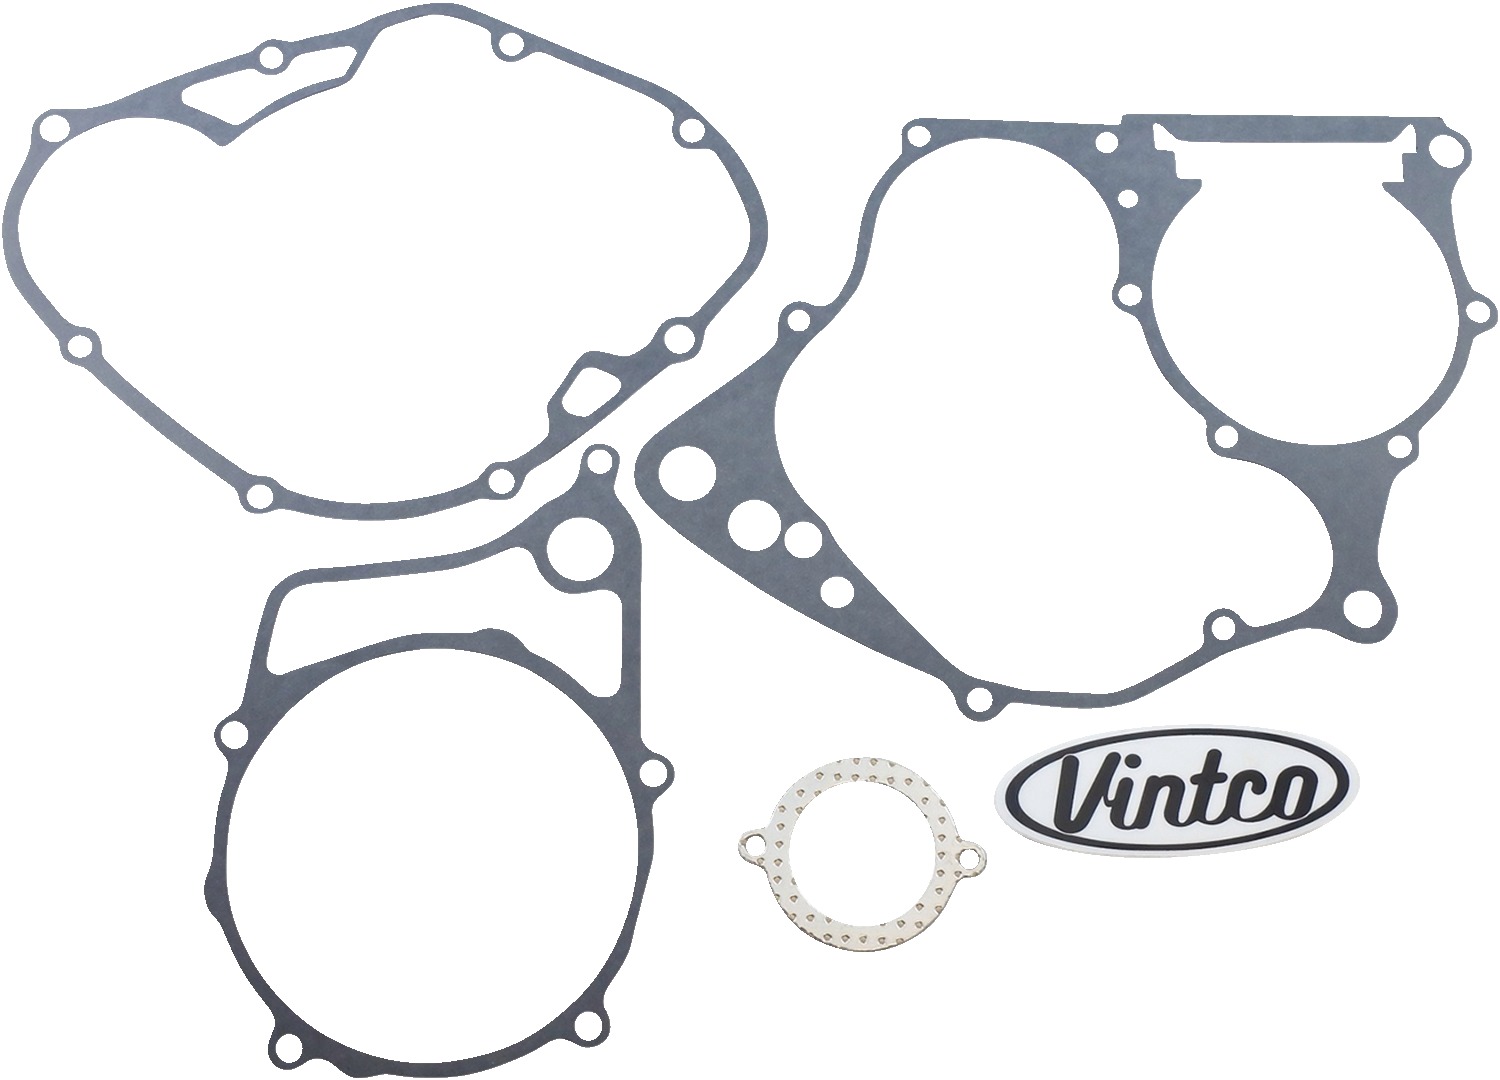 Lower Engine Gasket Kit - For 1979 Honda CR125 - Click Image to Close